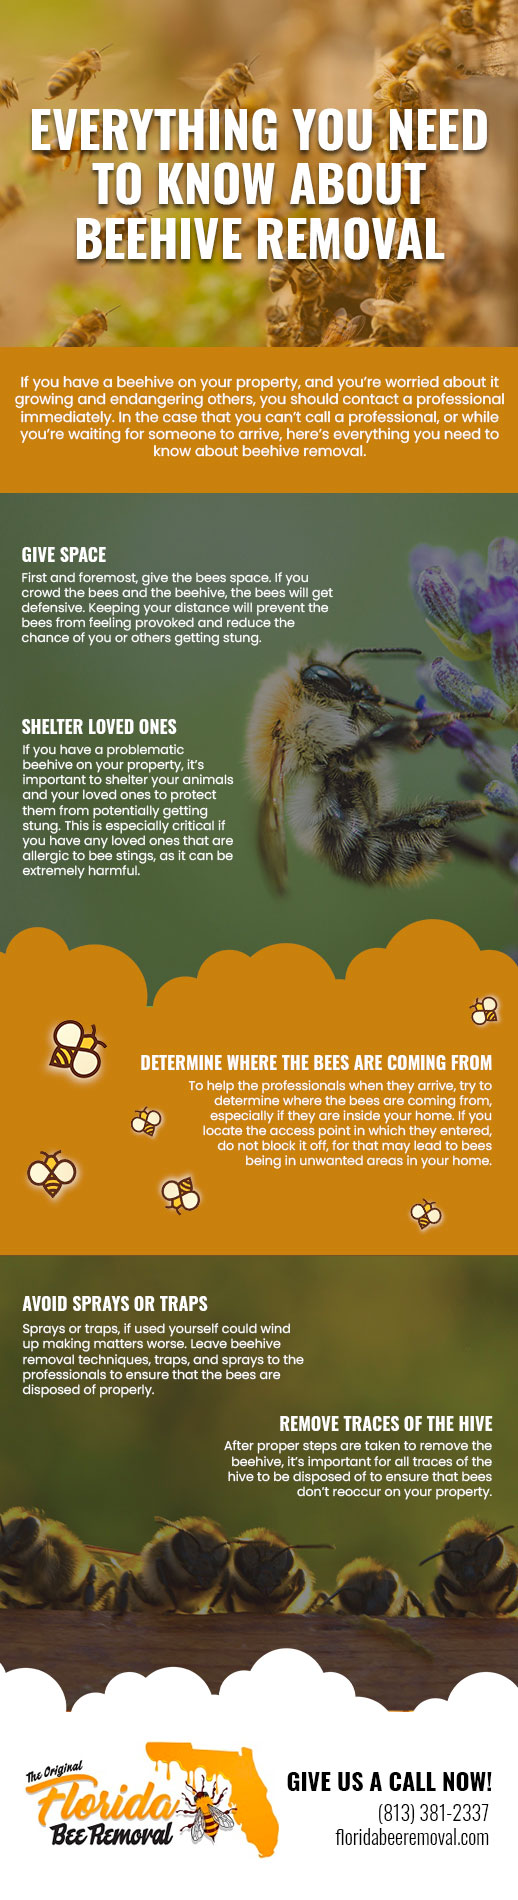 Everything You Need to Know About Beehive Removal